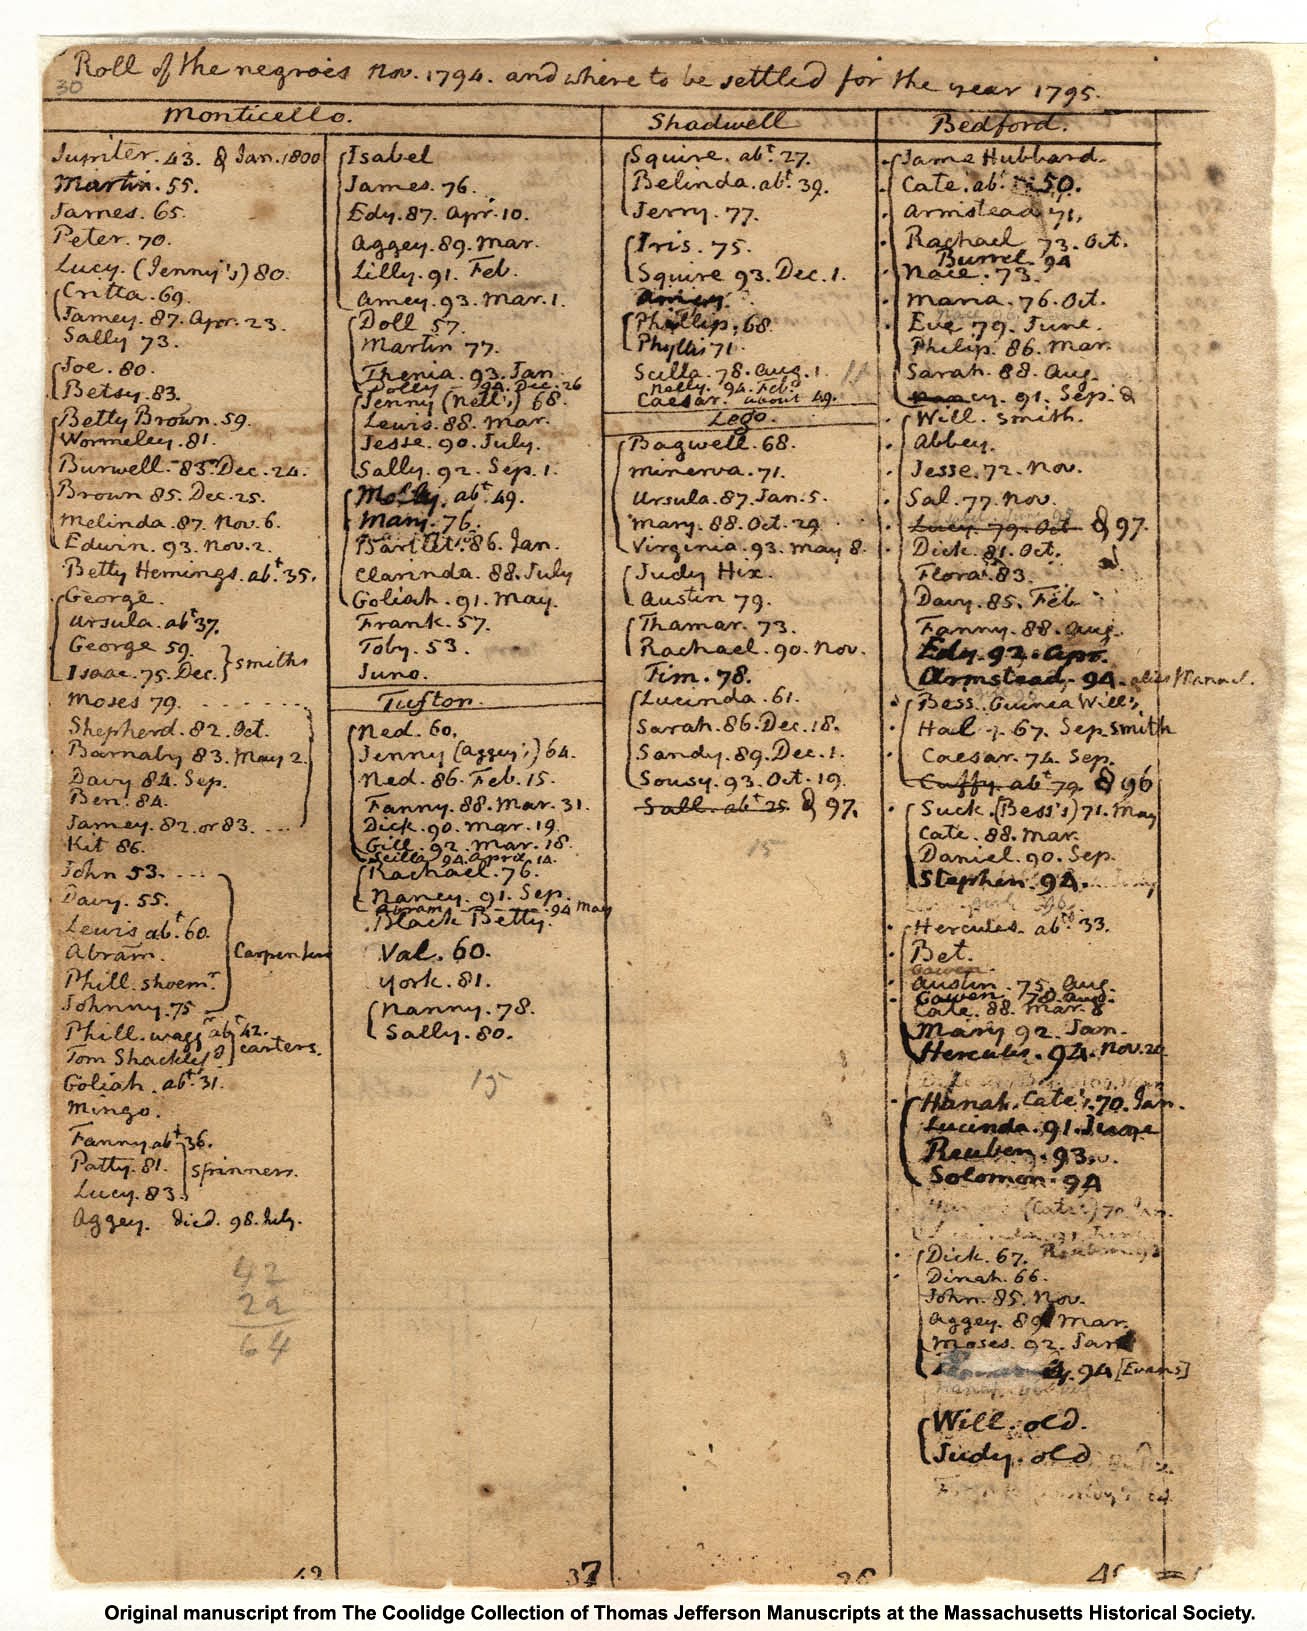 Record of the enslaved workers in Monticello Farm Book 1774-1824 (c) Collection of the Massachusetts Historical Society, Boston, Massachusetts, USA